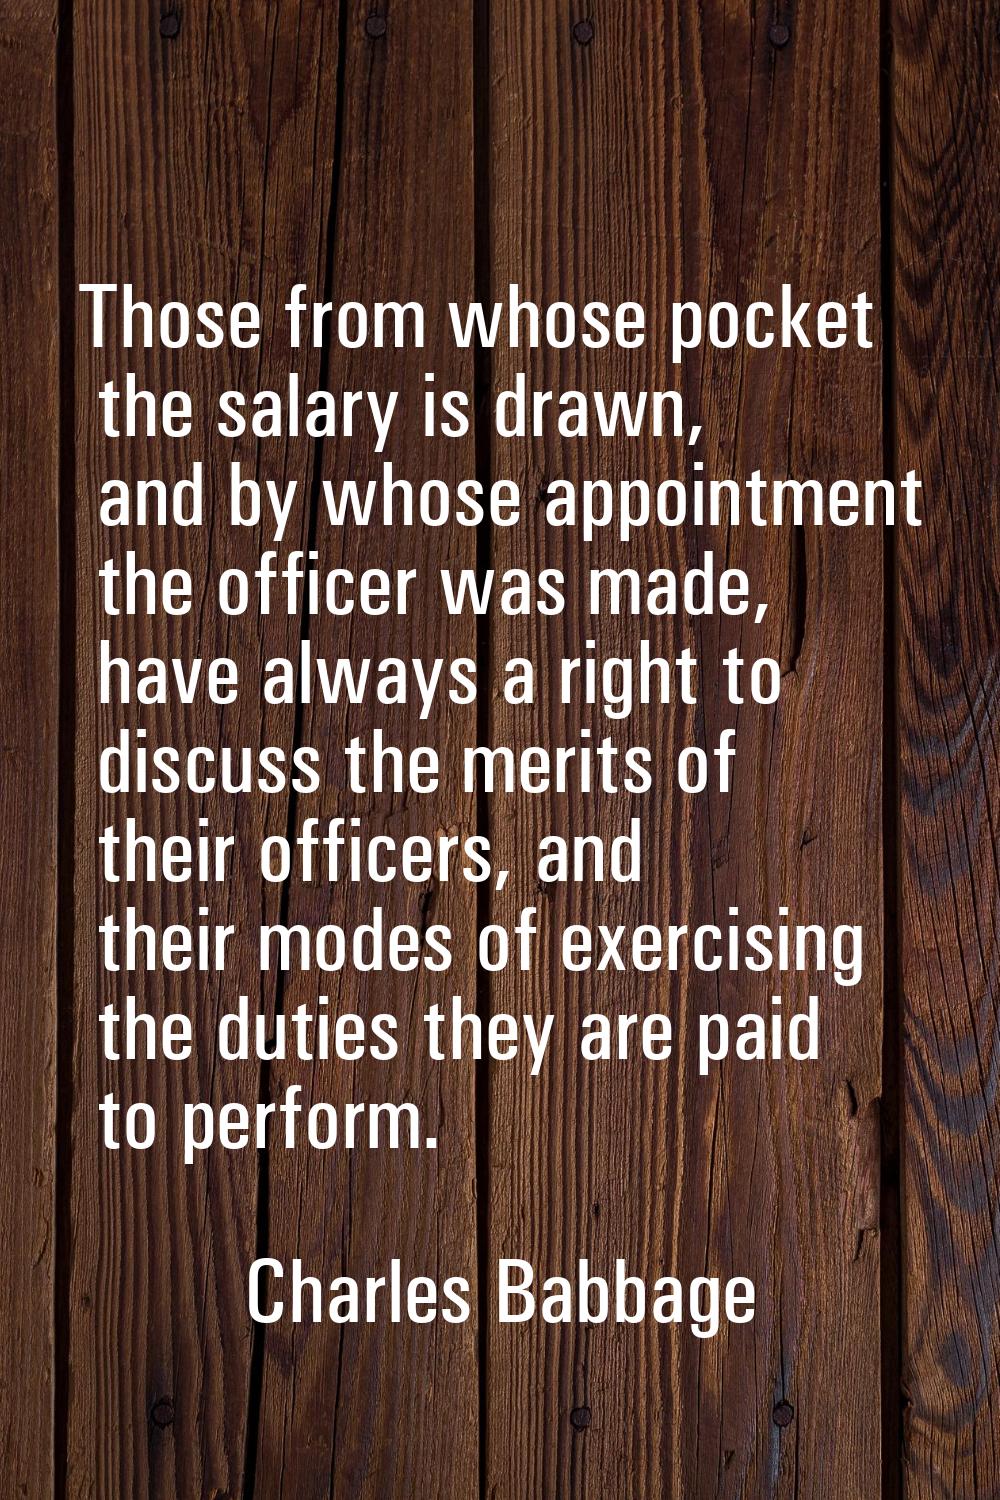 Those from whose pocket the salary is drawn, and by whose appointment the officer was made, have al